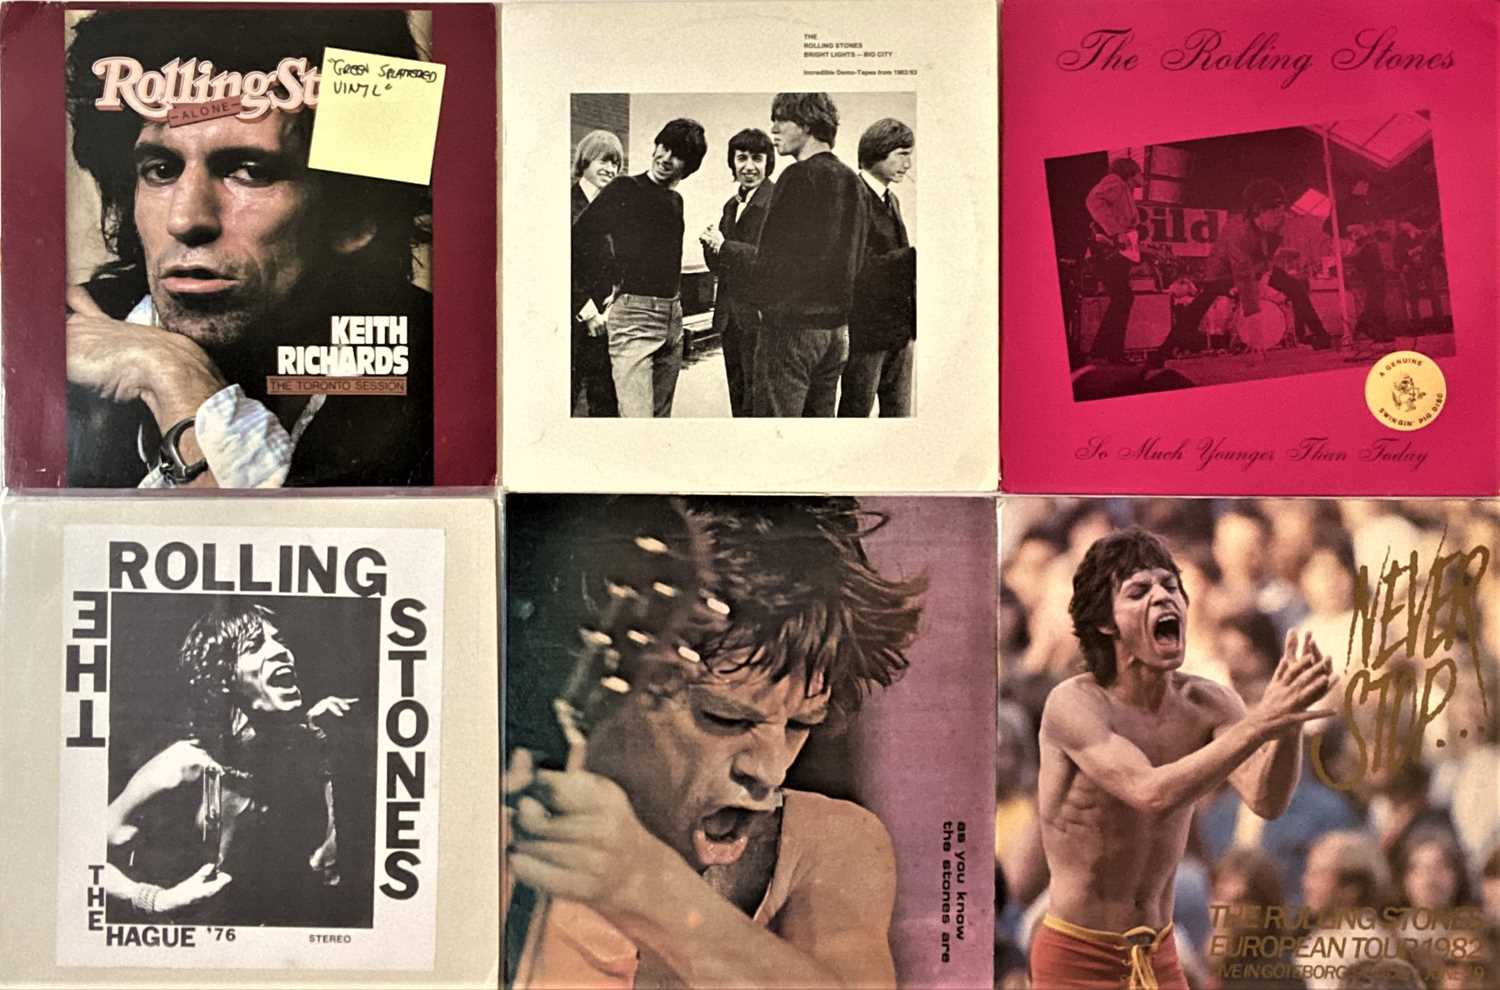 The Rolling Stones - Privately Pressed LPs - Image 2 of 3